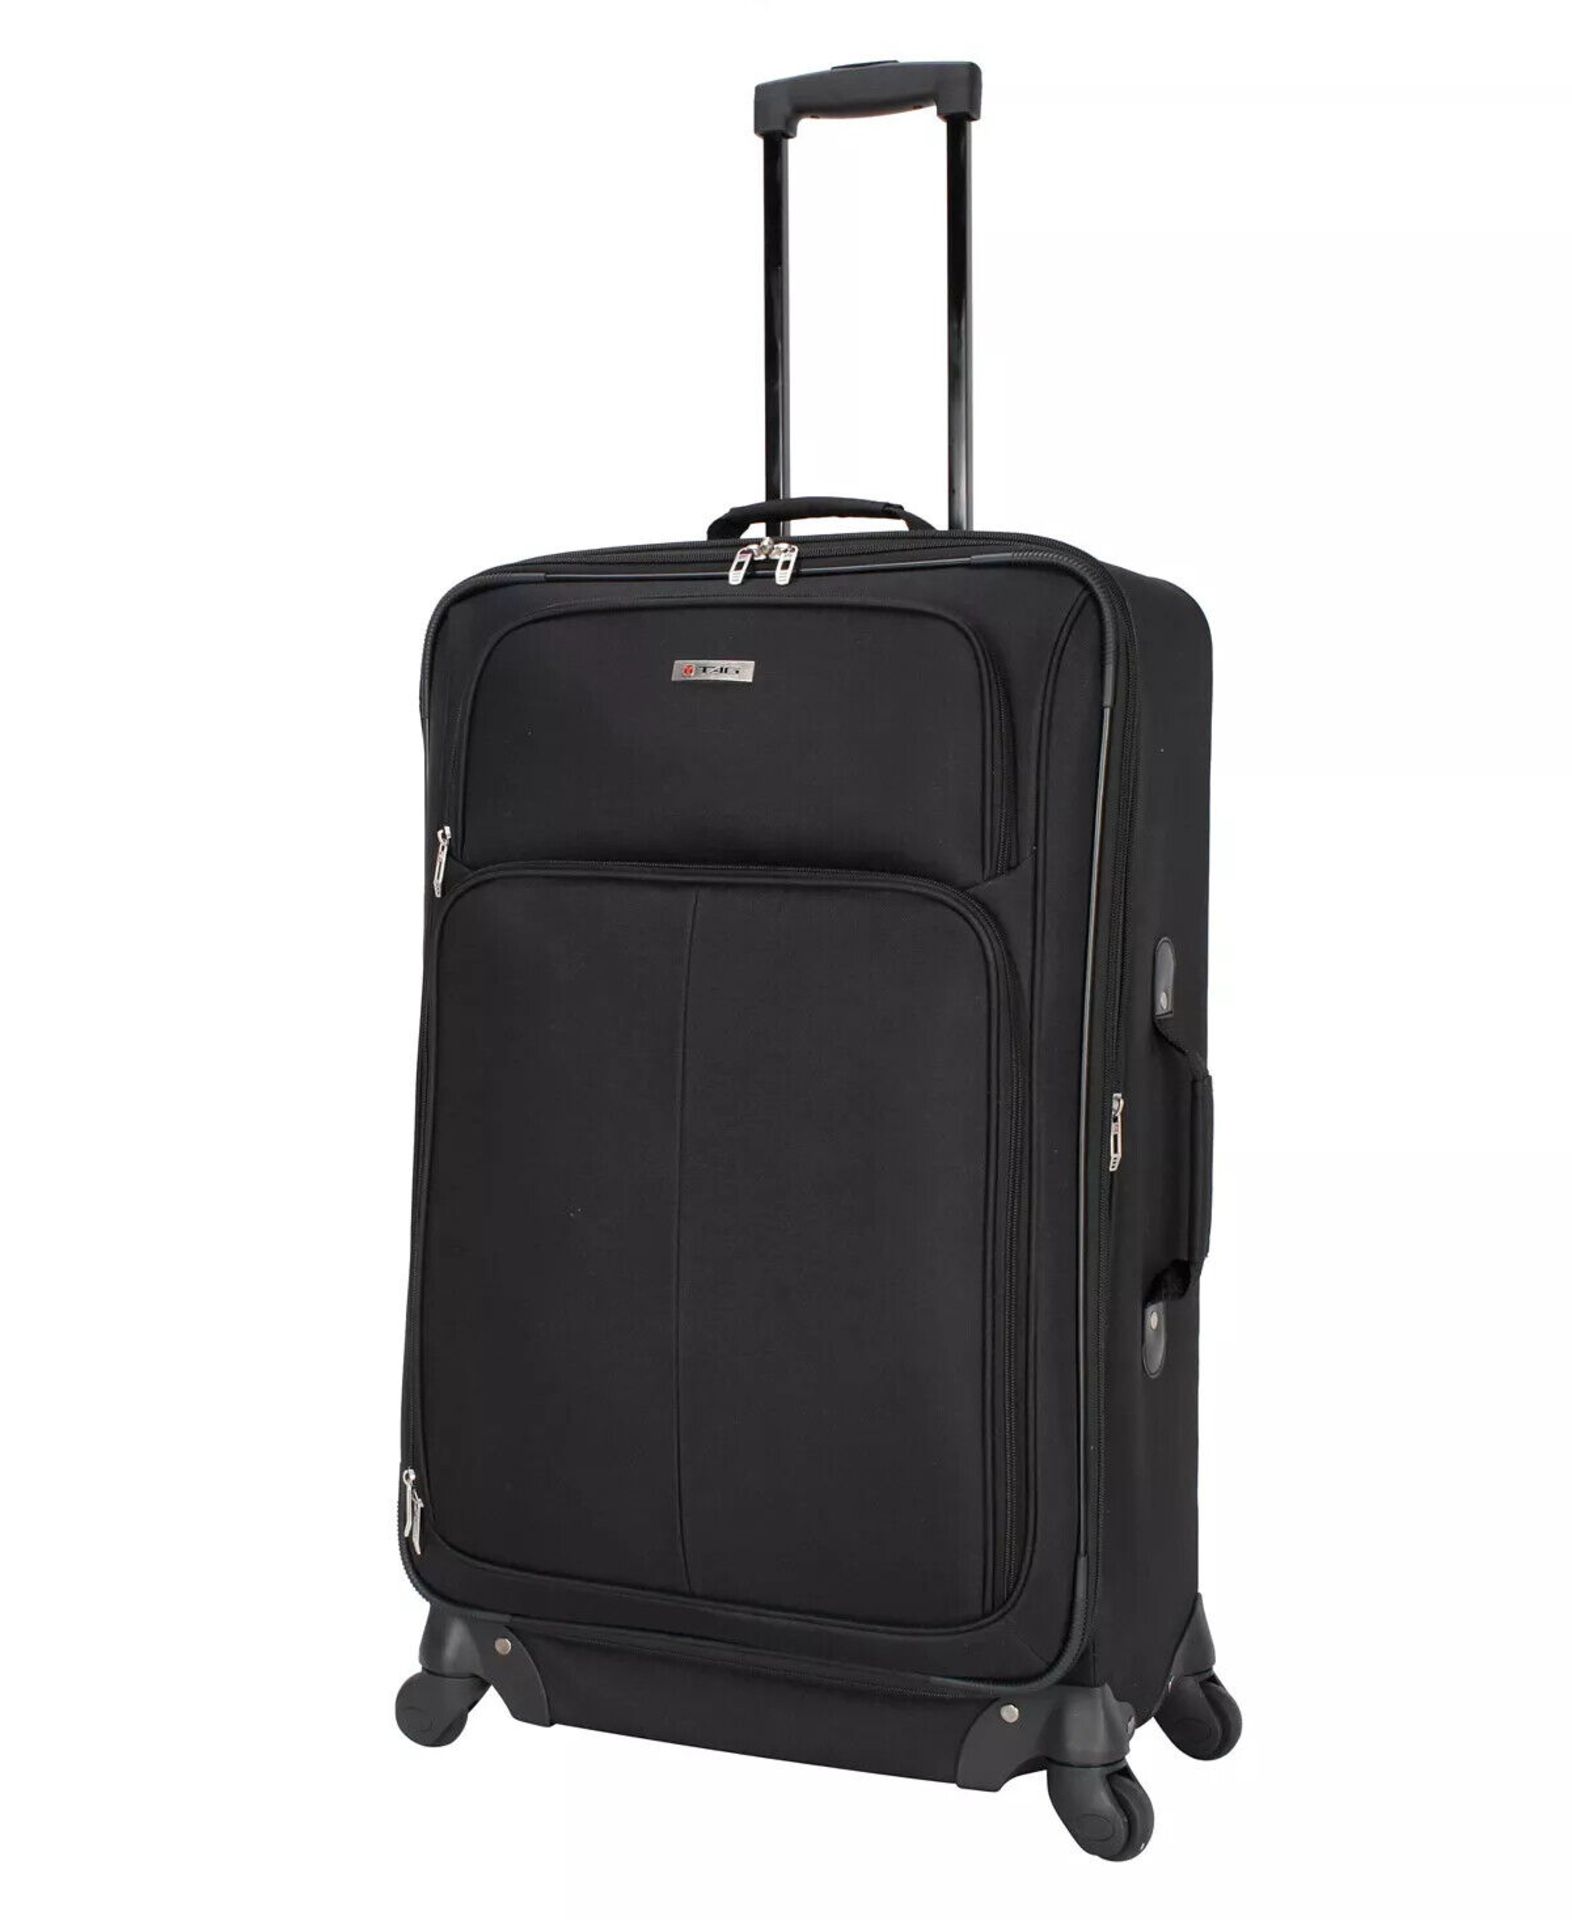 PALLET CONTANING 10 SETS OF 5 PC GENUINE TAG RIDGEFIELD SOFTSIDE LIGHTWEIGHT LUGGAGE SET - Image 10 of 10